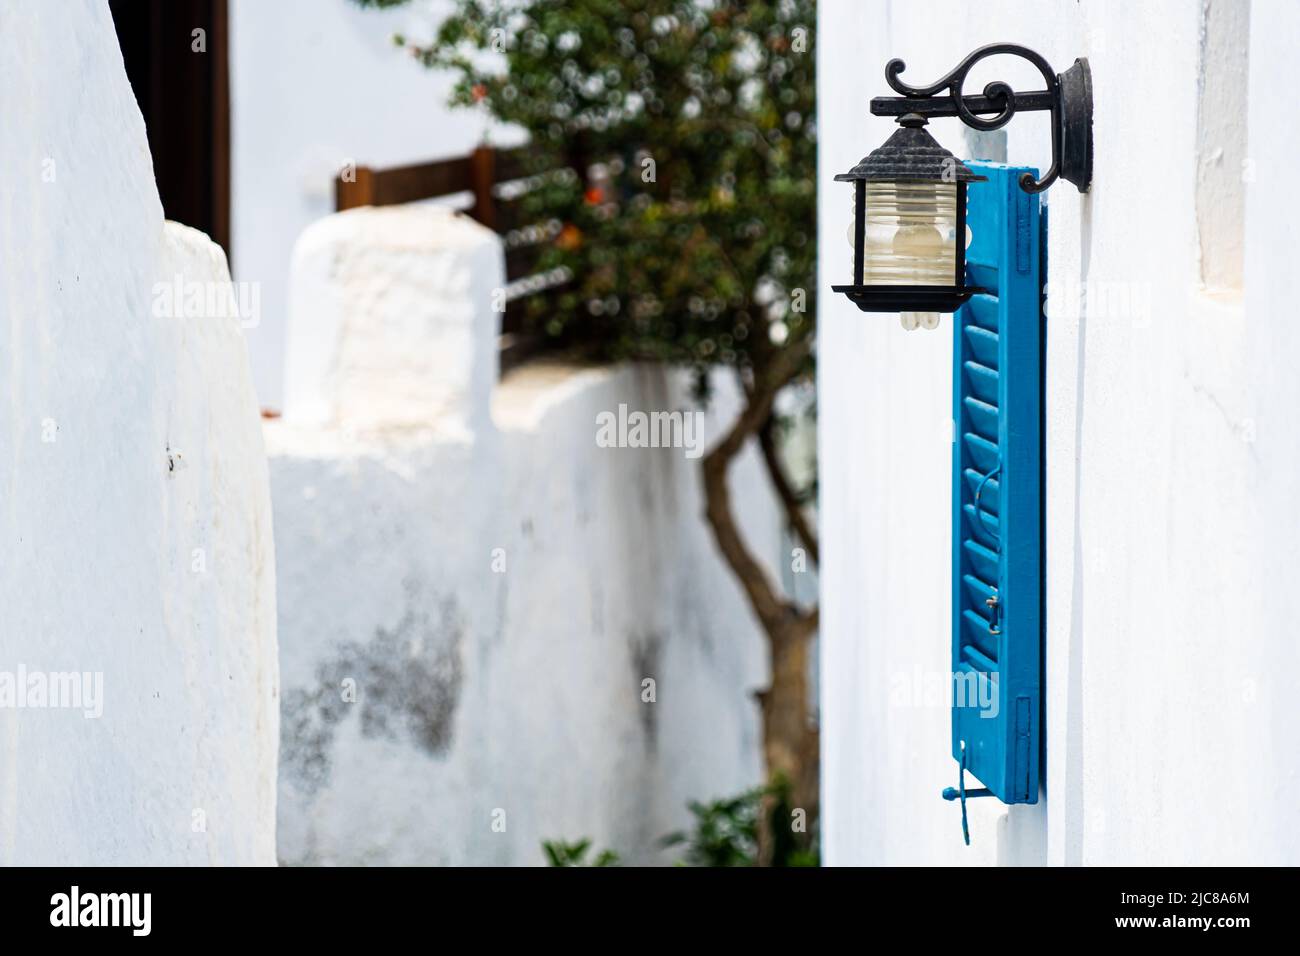 Santorini: A side alley in the town of Megalochori with a traditional sky blue shutter and a lantern on a whitewashed wall Stock Photo